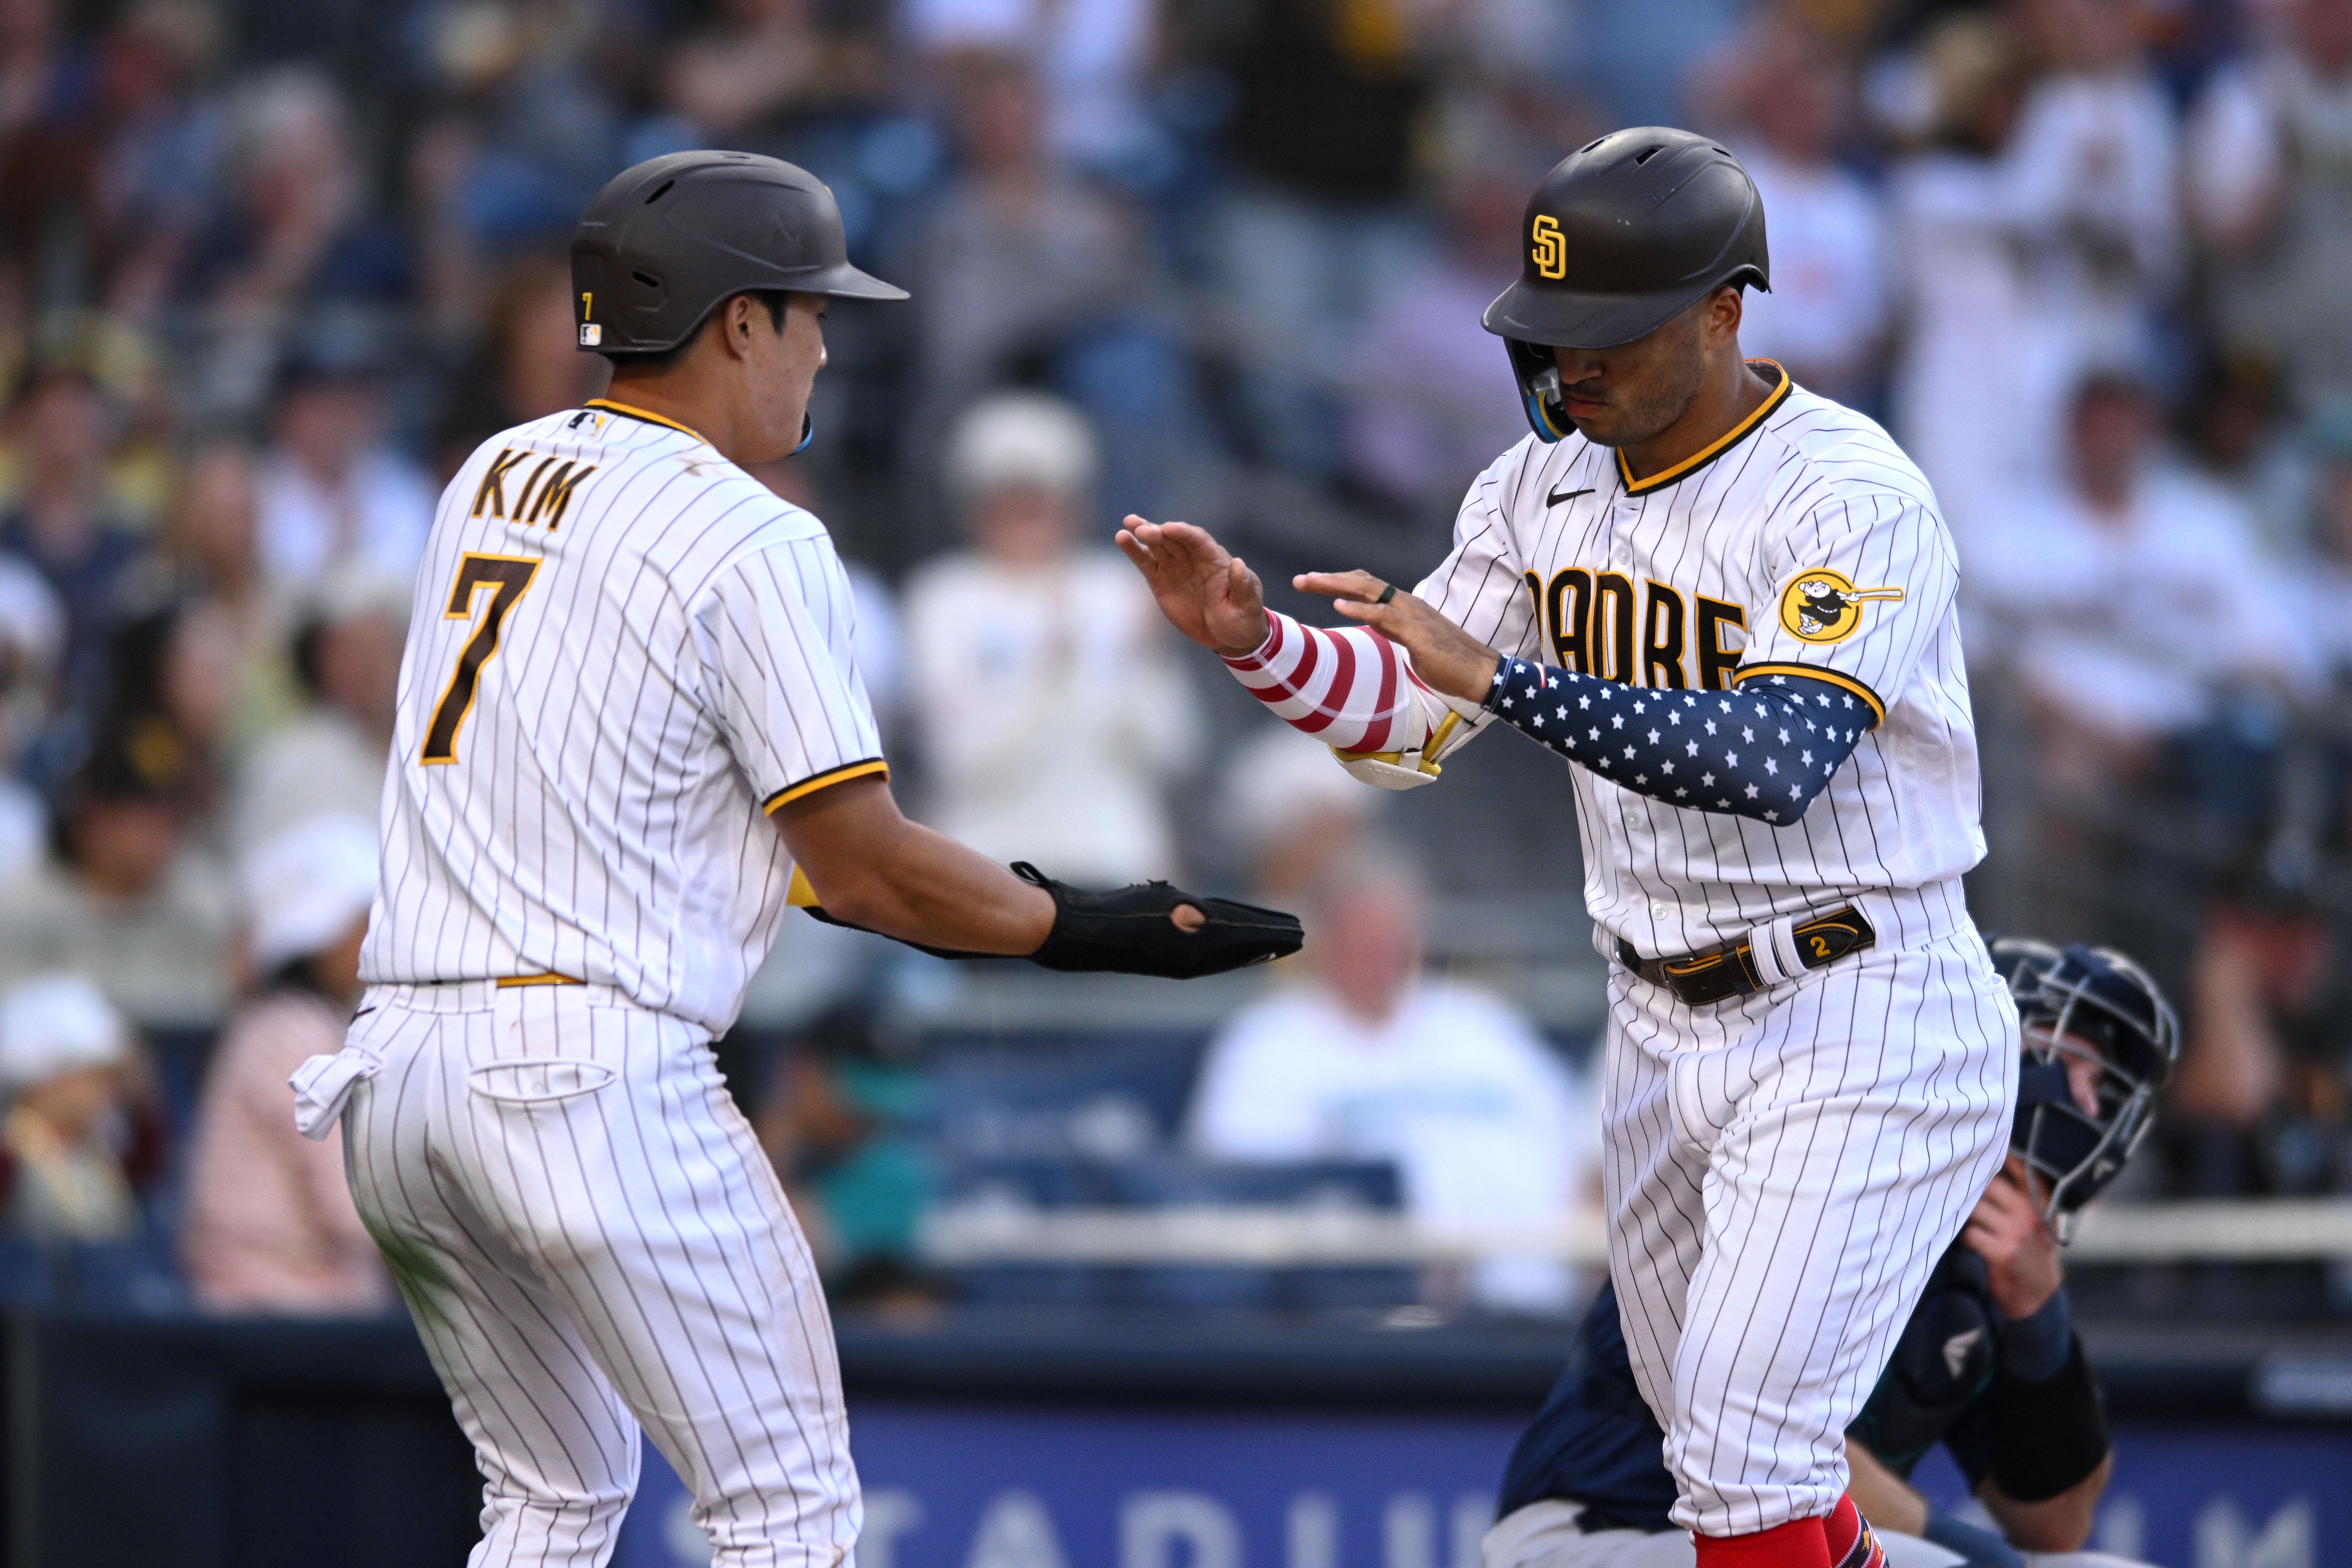 Padres vs Mariners Prediction, Odds, Moneyline, Spread & Over/Under for July 5